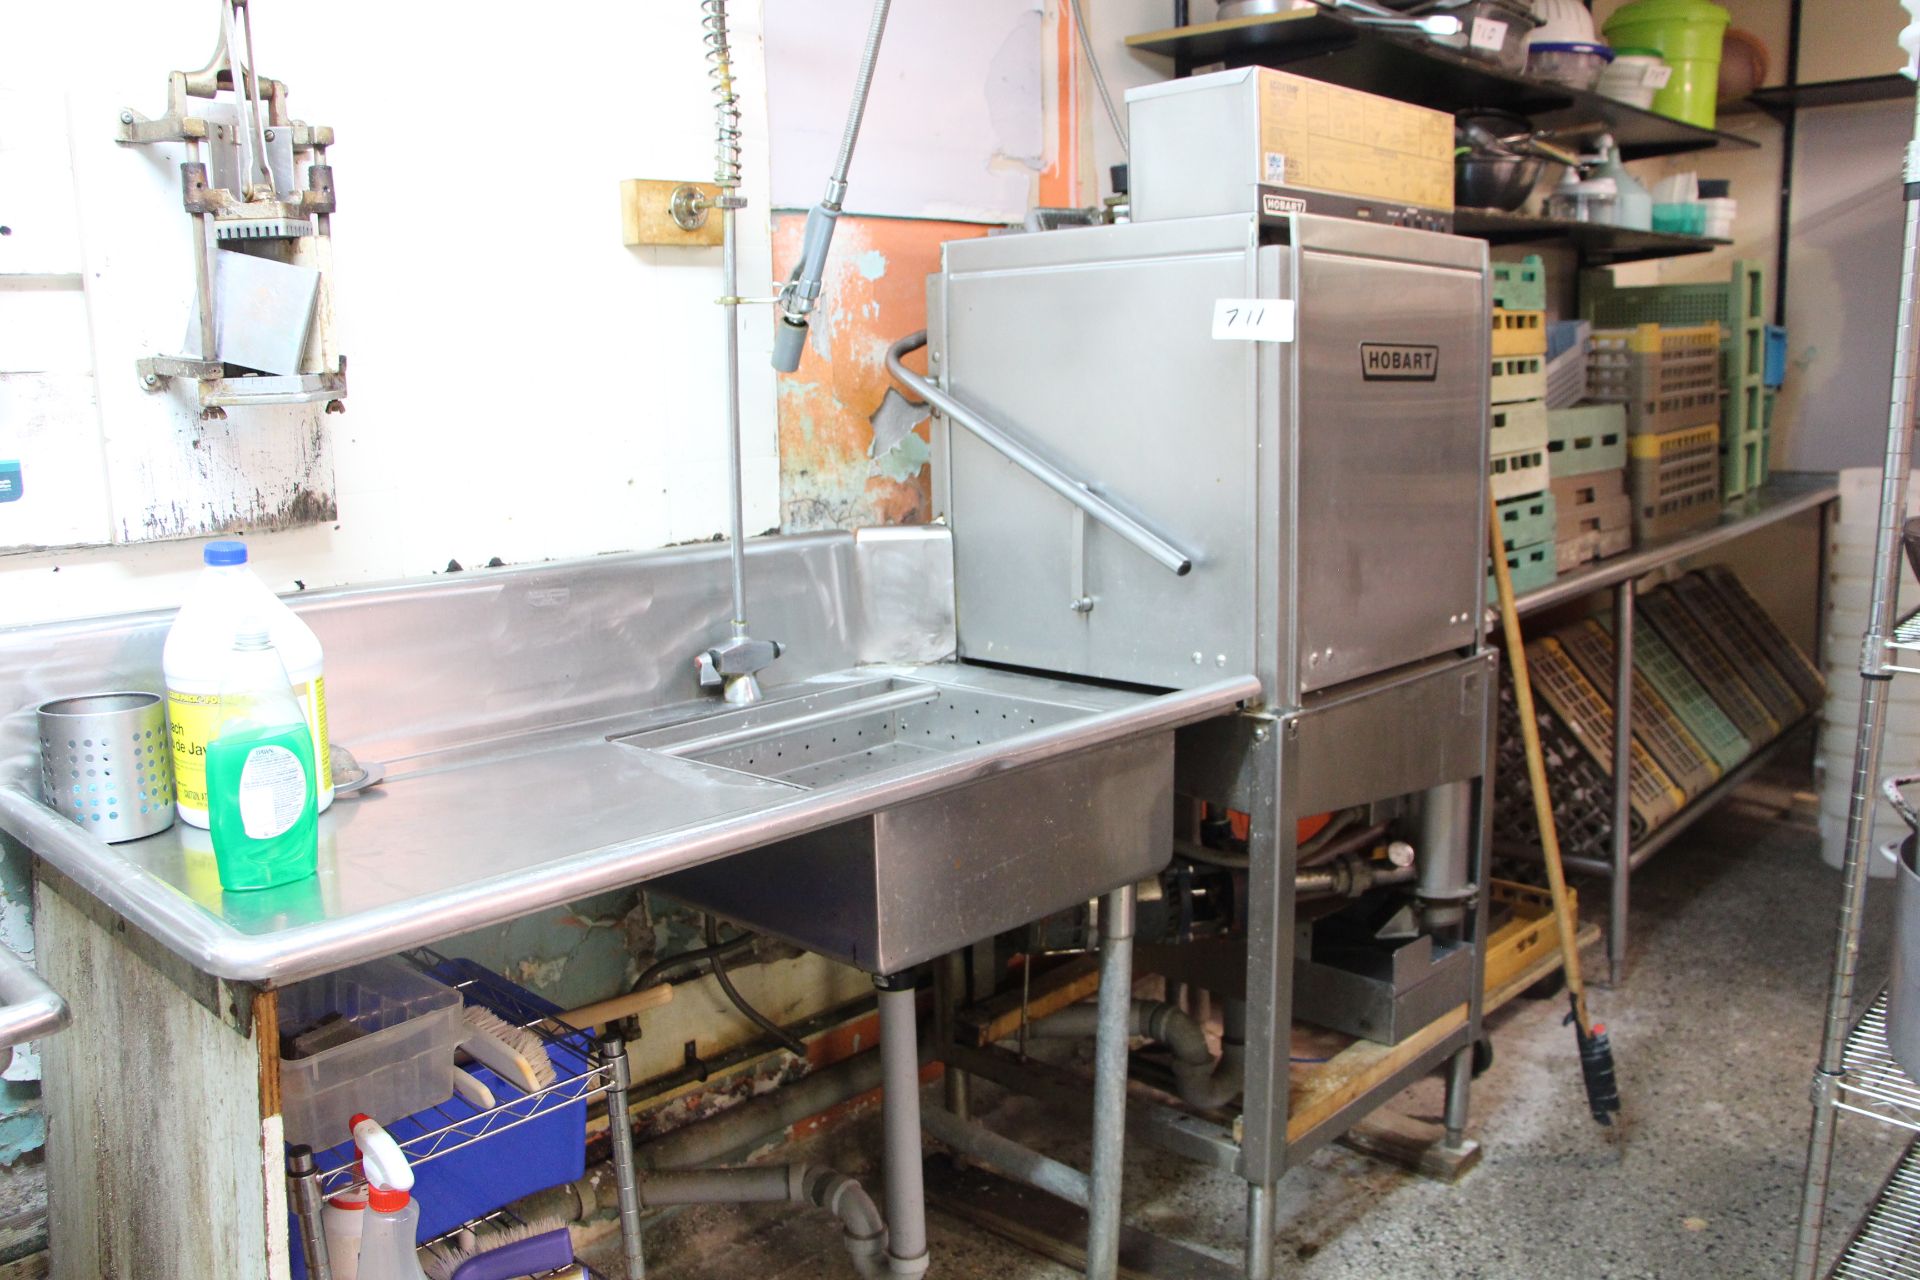 Hobart pass thru dishwasher c/w infeed s/s table and outflow s/s table w/sink and sprayer - Image 3 of 4